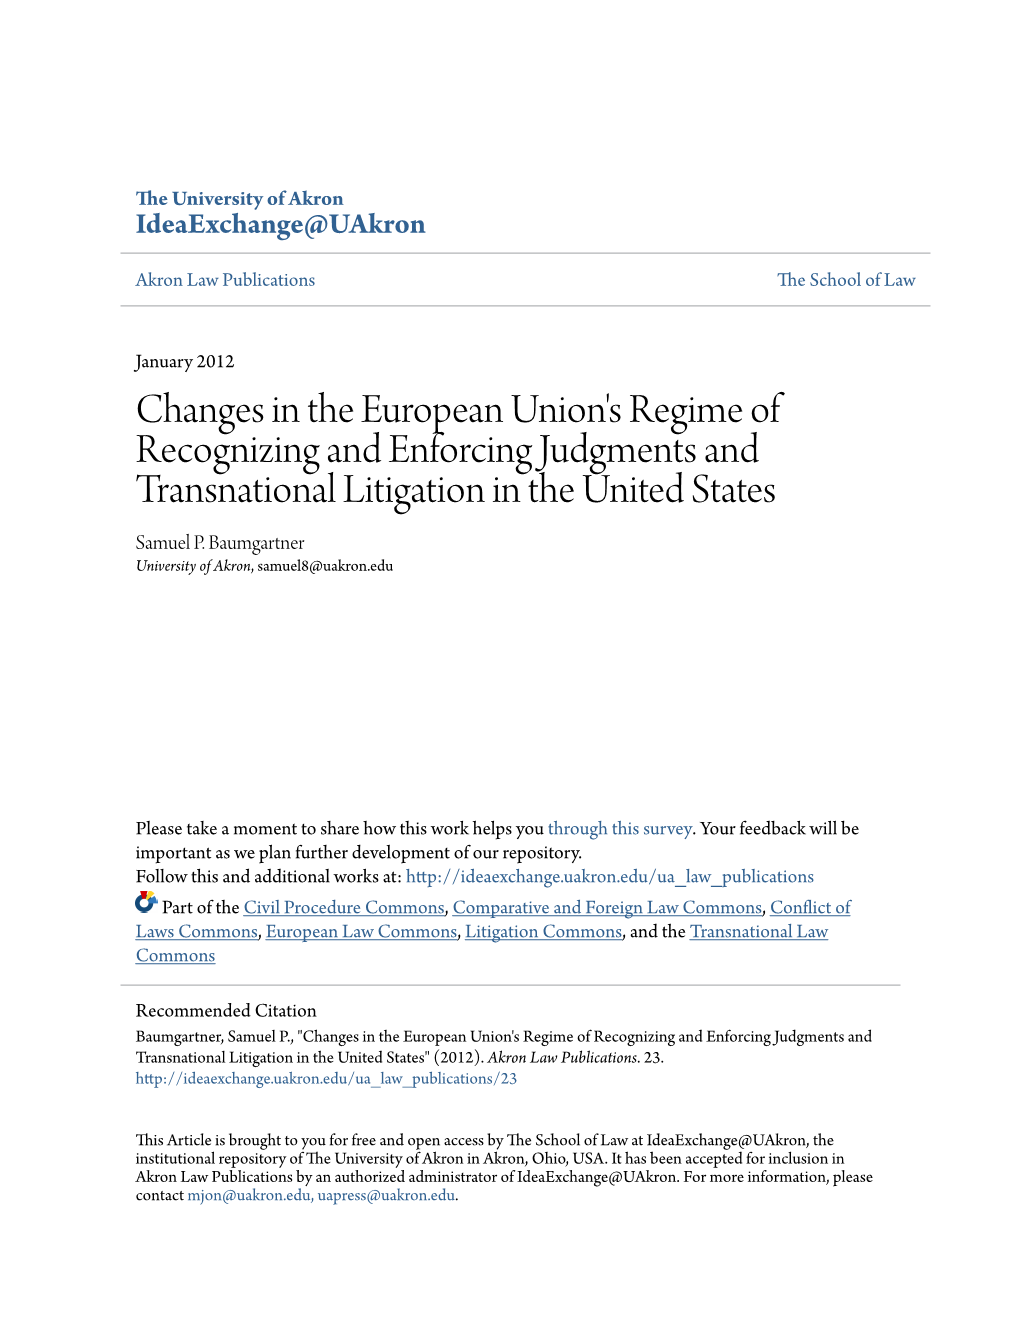 Changes in the European Union's Regime of Recognizing and Enforcing Judgments and Transnational Litigation in the United States Samuel P